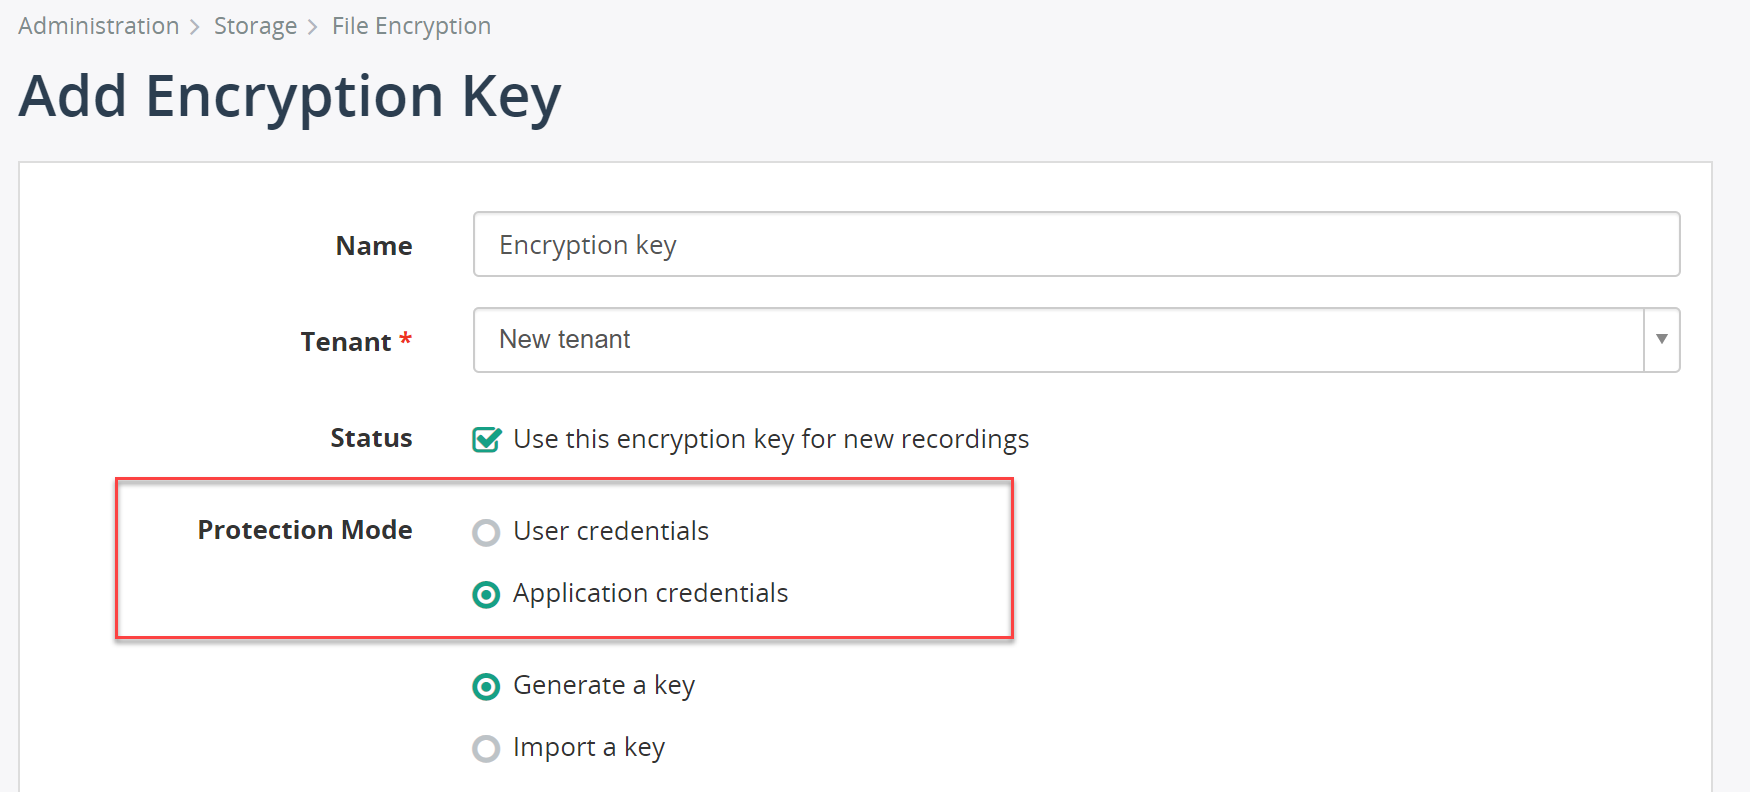 Add Protection Mode setting to encryption keys